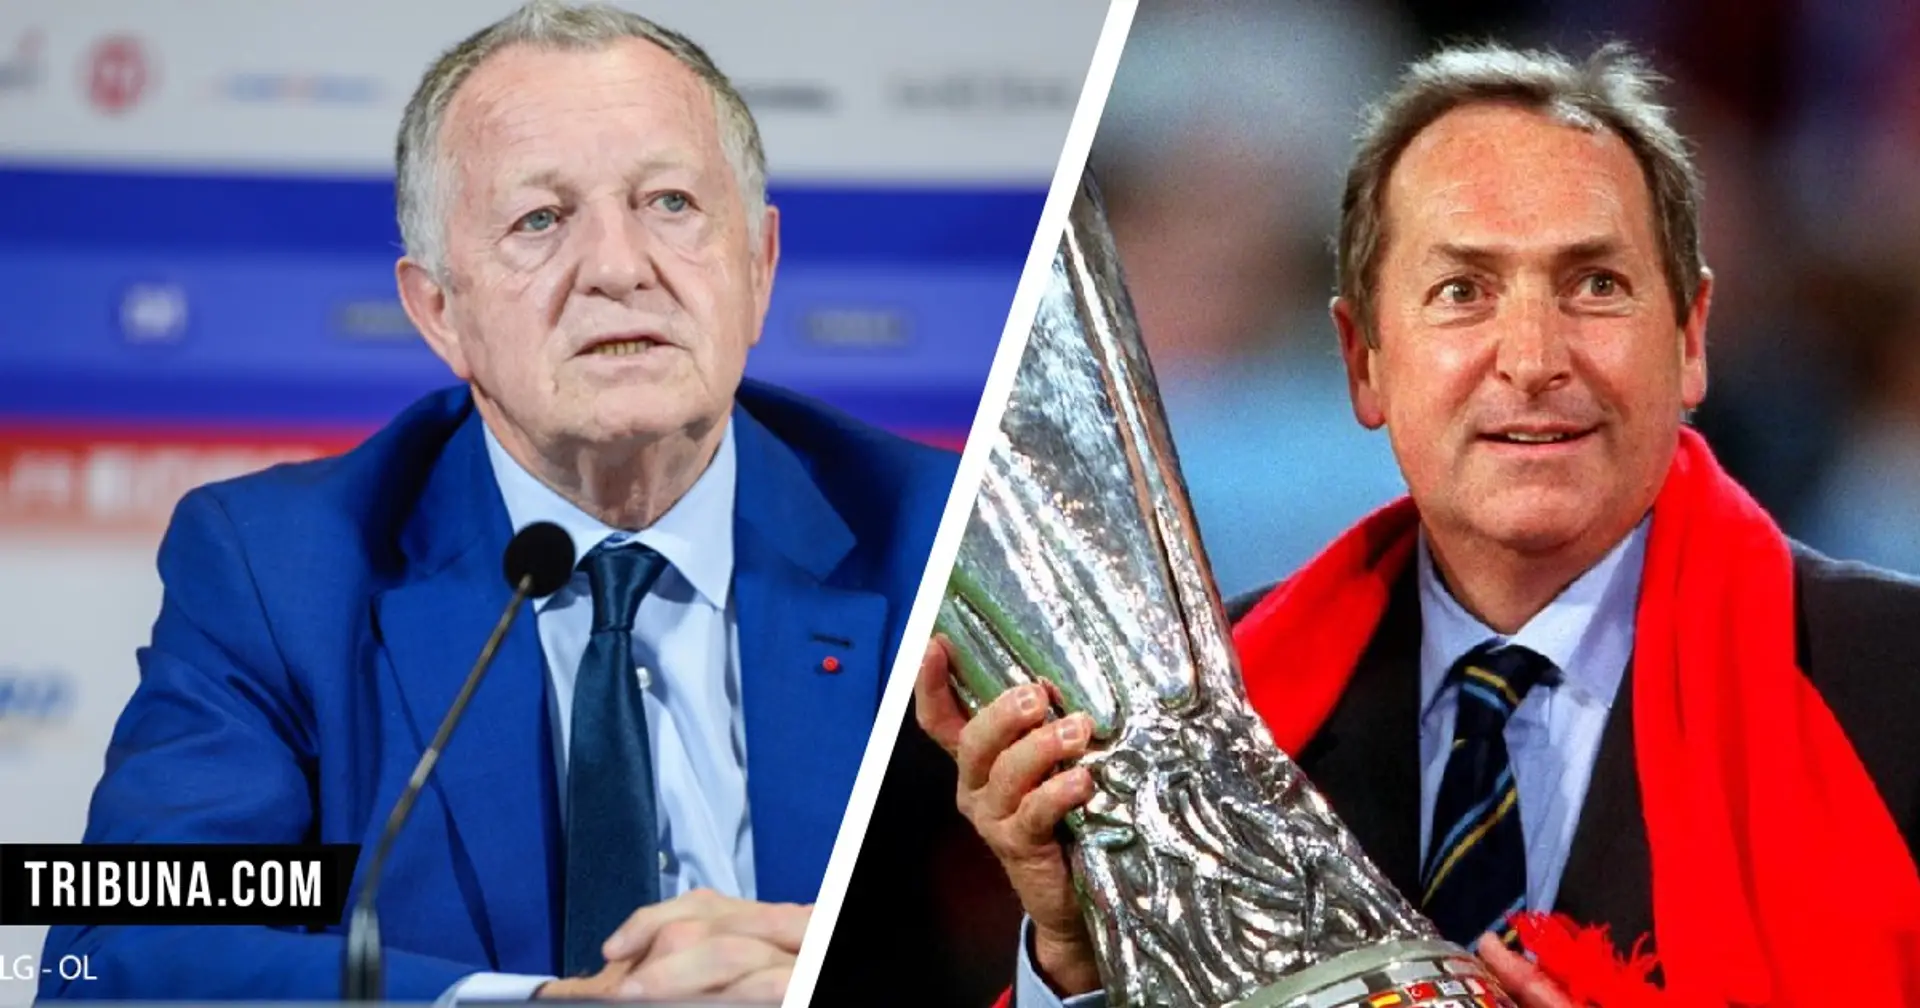 Lyon owner Aulas announces wish to rename training ground after Houllier, organize Liverpool friendly